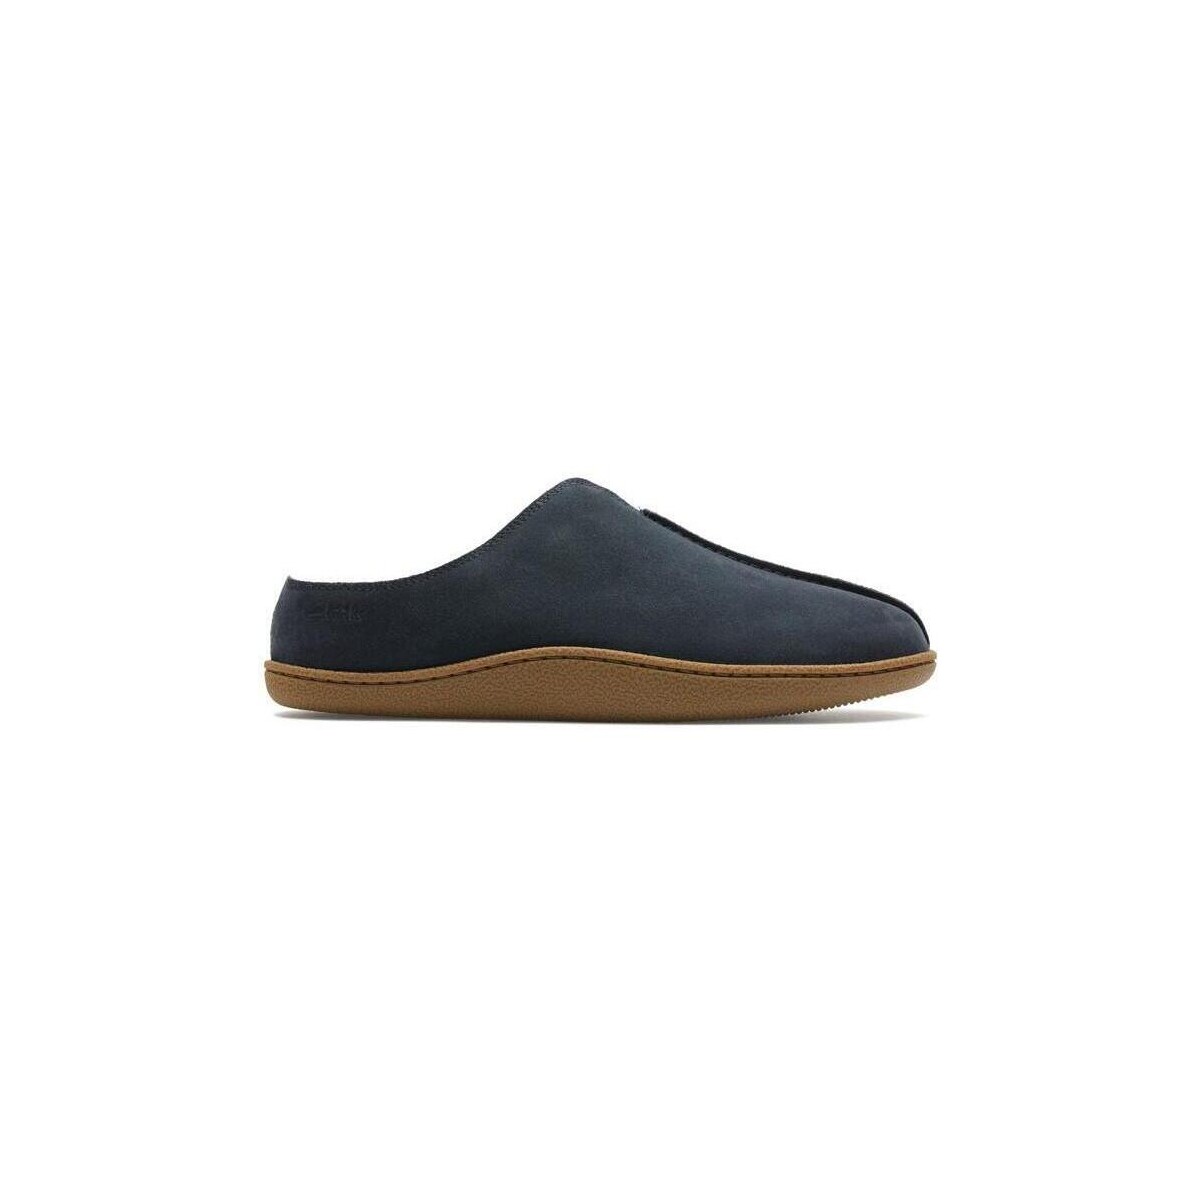 Chaussures Homme Chaussons Clarks Home Mule Marine